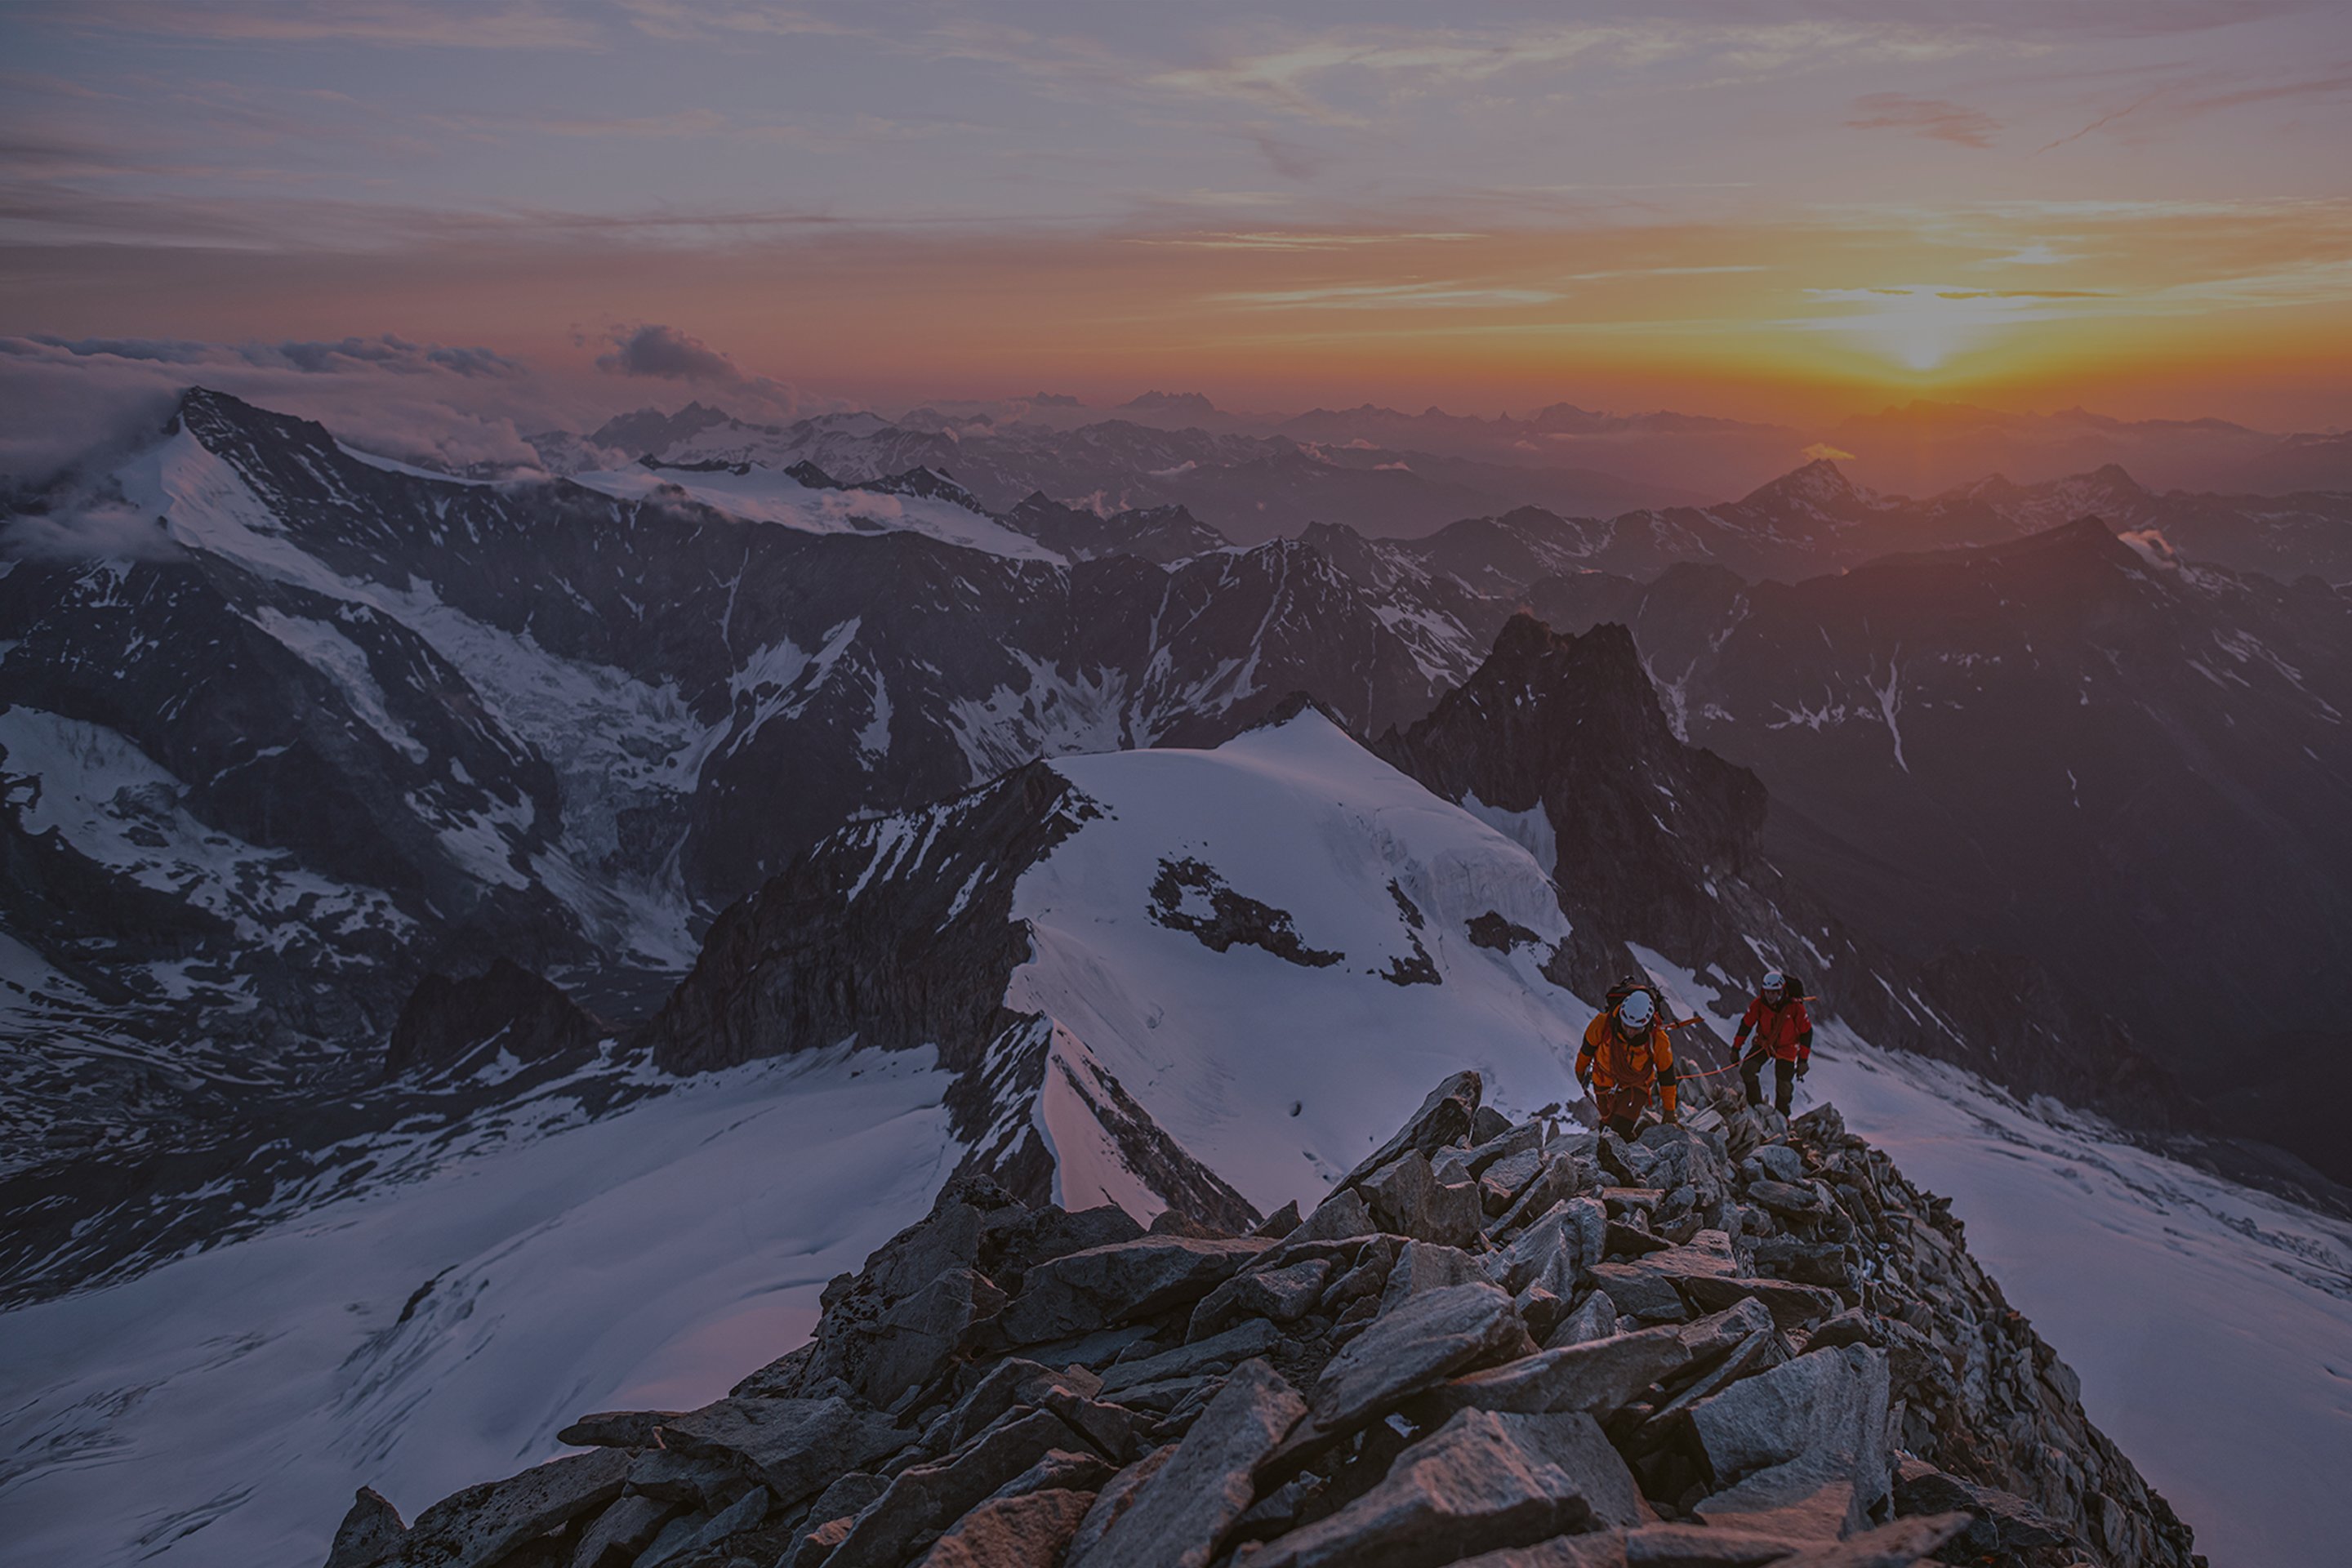 At sunrise, a pair of mountaineers make the final push towards the summit.